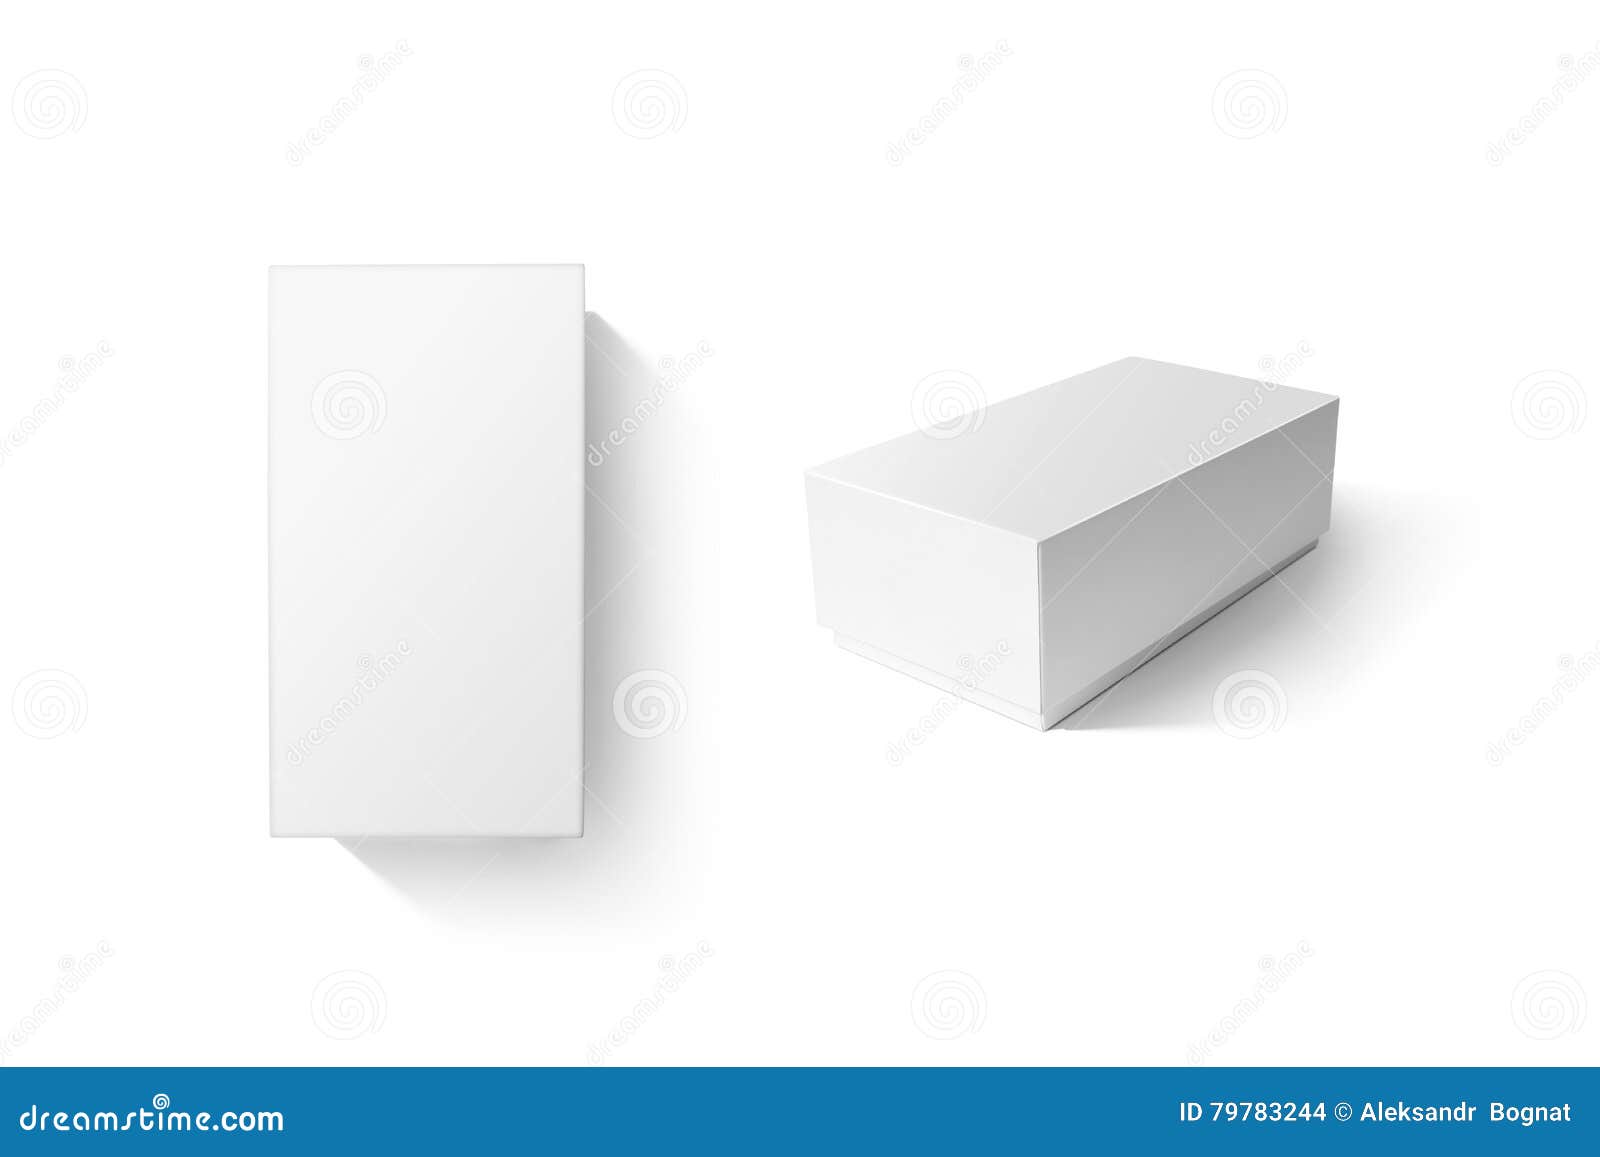 Download White Carton Product Box Set Mockup, Top Side View Stock ...